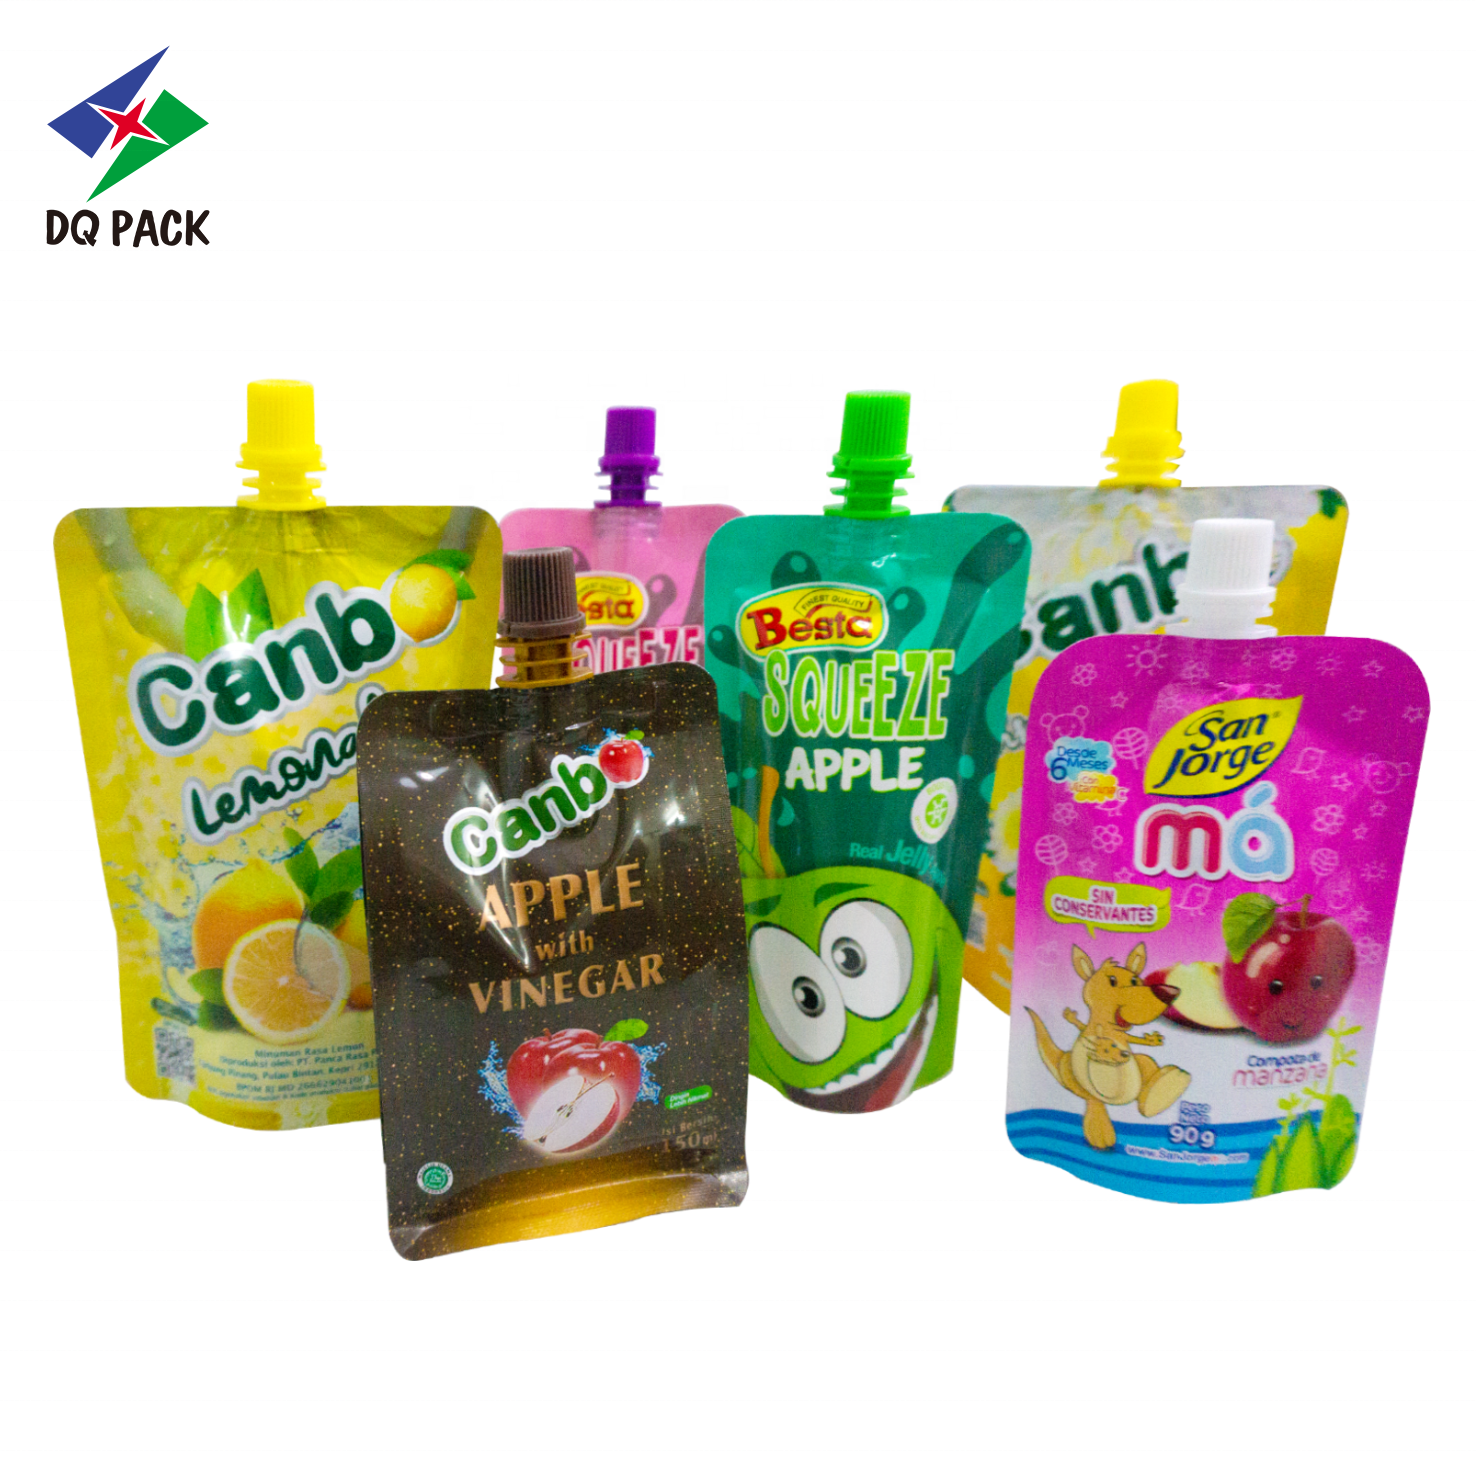 DQ PACK Custom Design Laminated Material Stand up Plastic Spout Pouch Bag for Fruit Juice